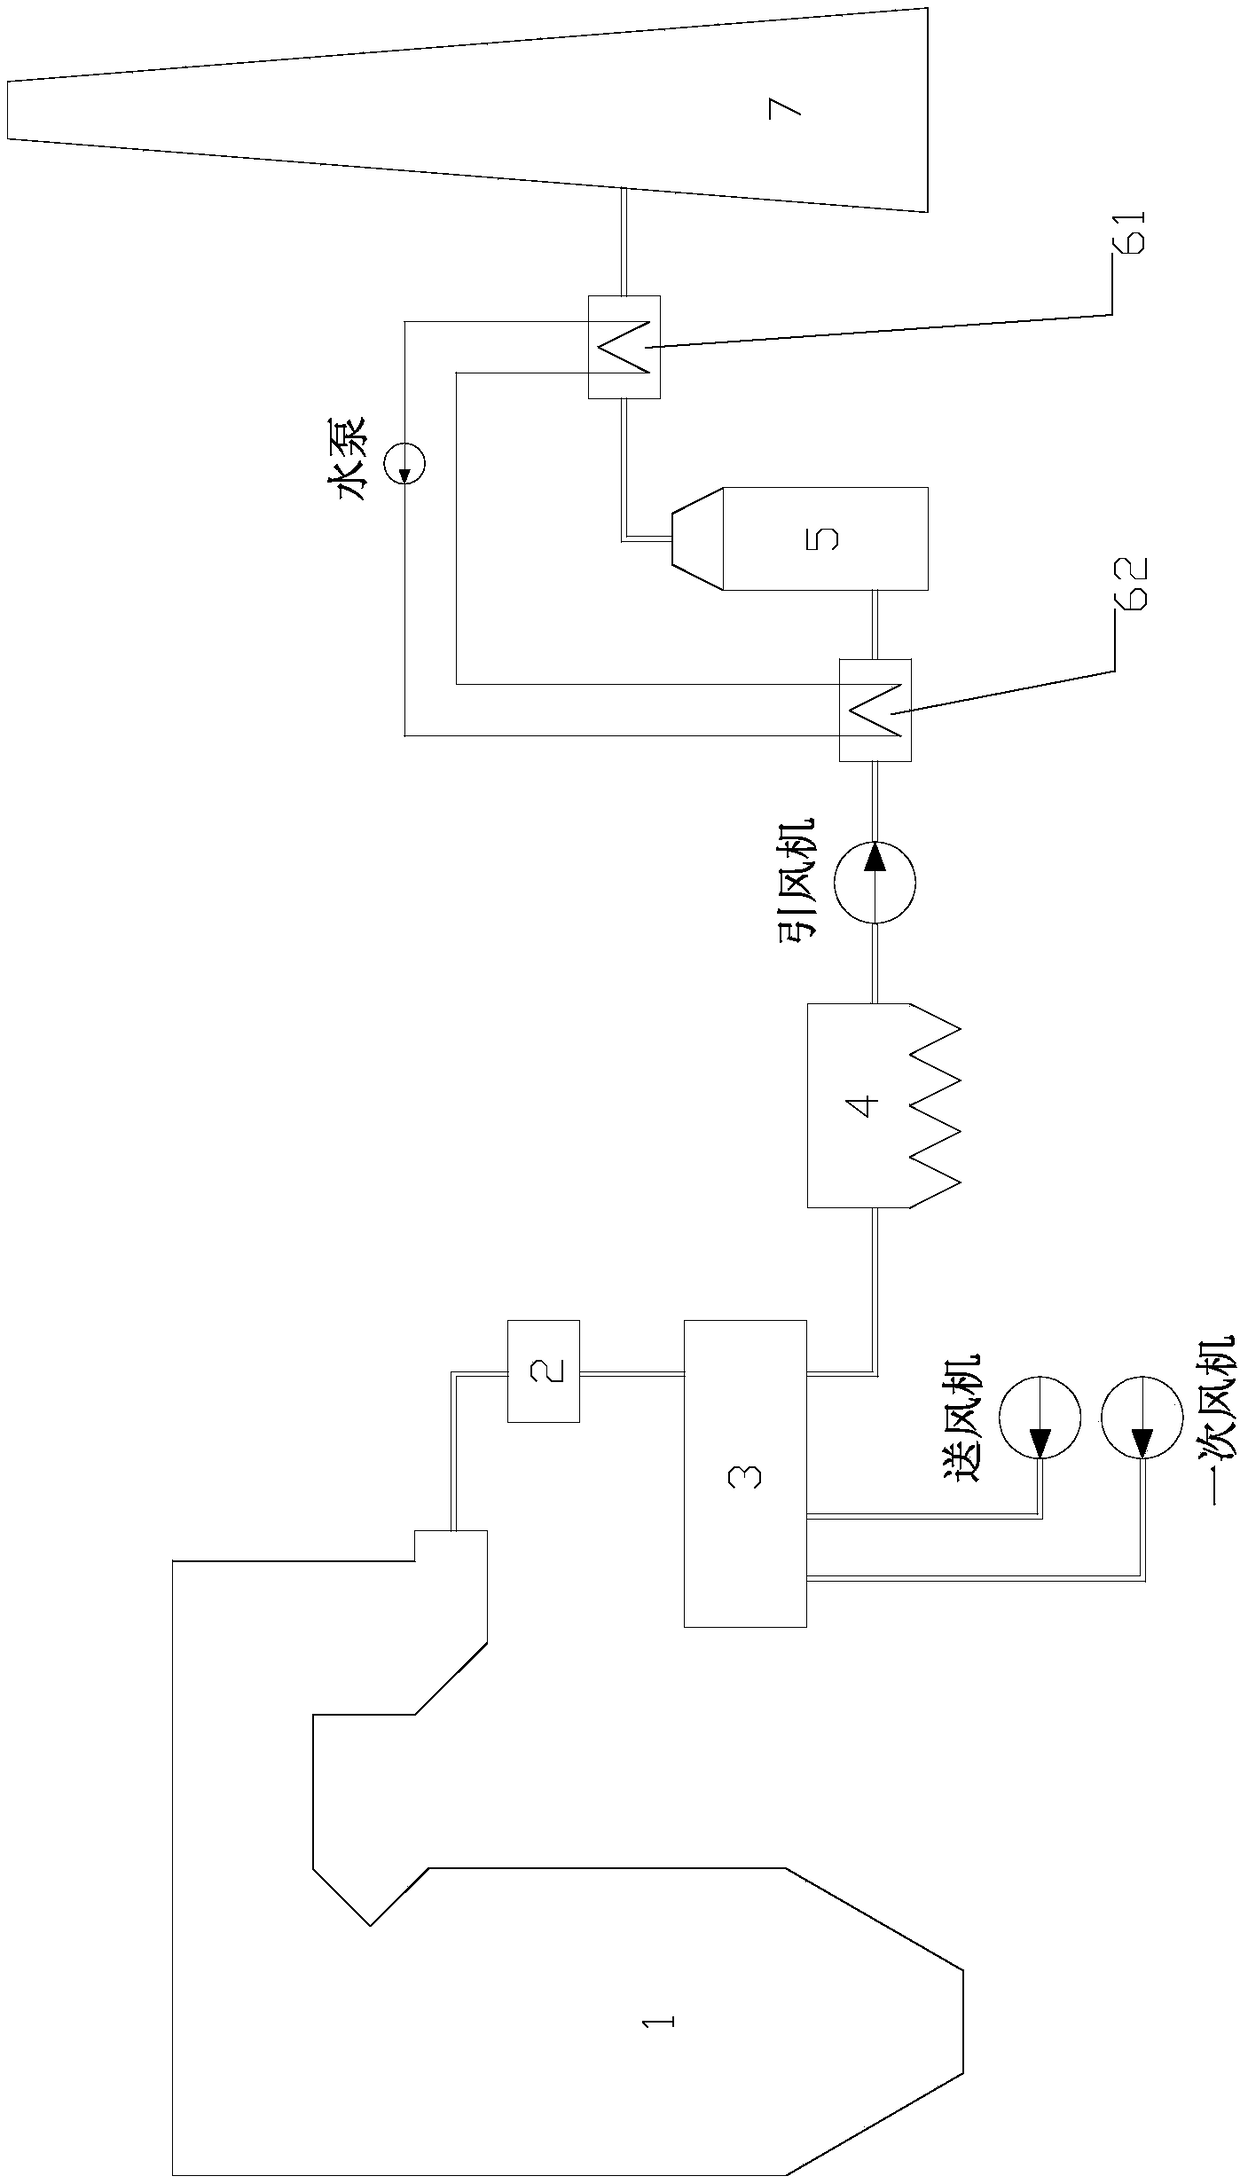 Device for eliminating white smoke plume from chimney